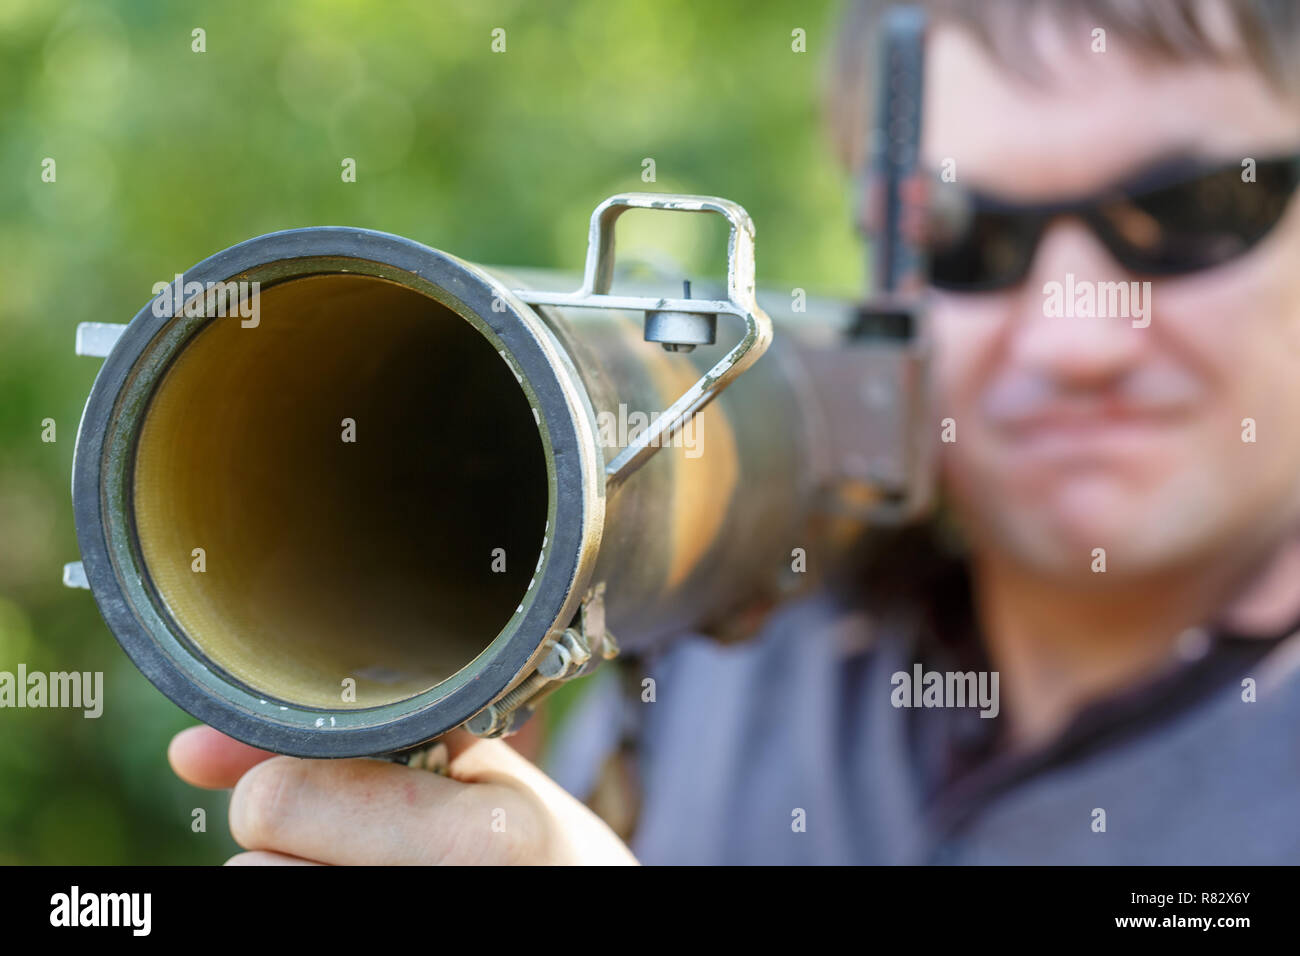 Mercenary in black glasses with anti-tank rocket launcher, RPG in hand. Close-up Stock Photo